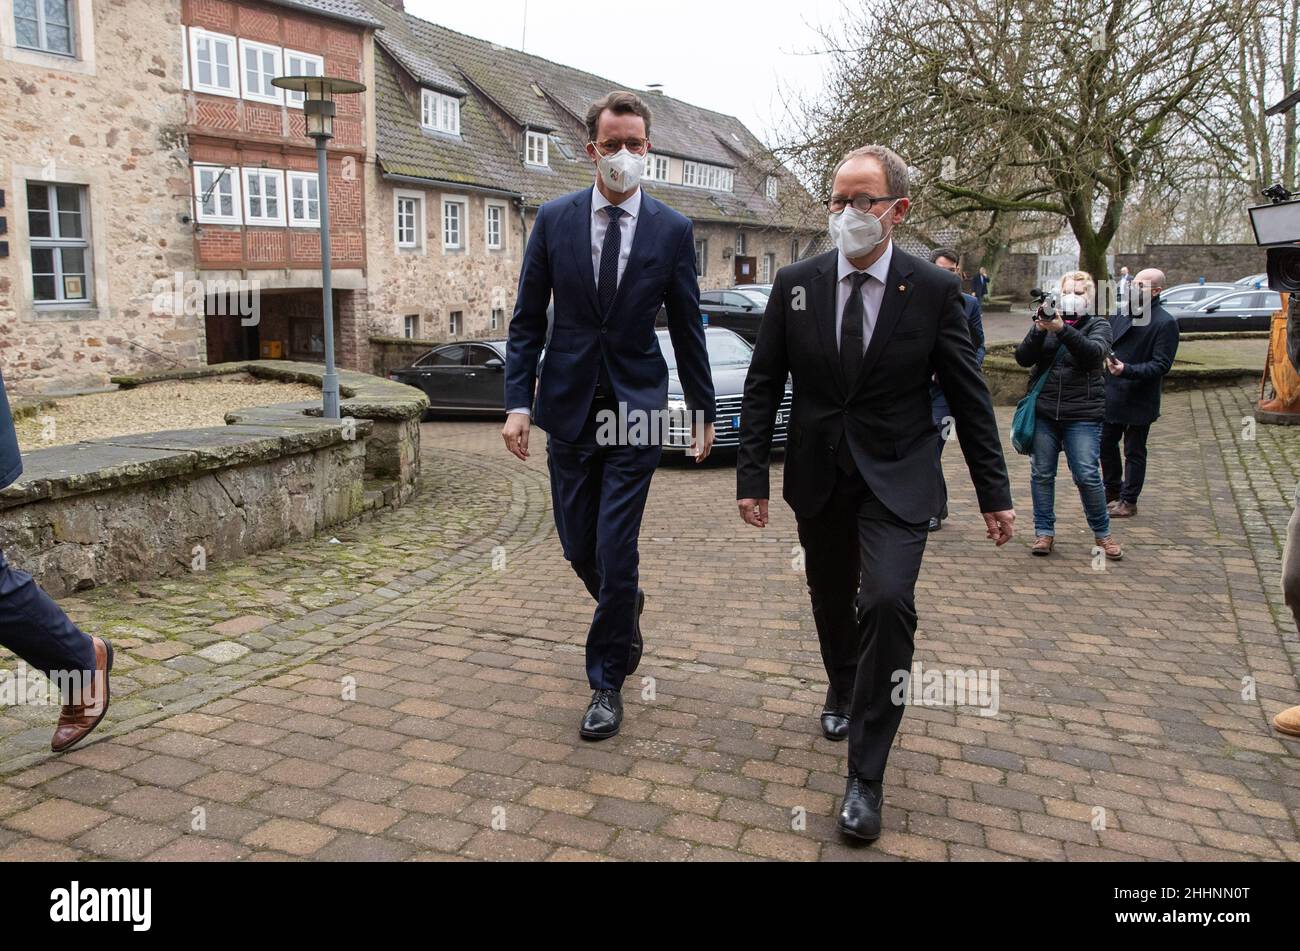 25 January 2022, North Rhine-Westphalia, Extertal: Hans-Jörg Düning-Gast (r), Chairman of the Lippe Regional Association (LVL), welcomes Hendrik Wüst (CDU, l), Minister President of North Rhine-Westphalia, to Sternberg Castle. The cabinet of the state government of North Rhine-Westphalia meets for a conference at Sternberg Castle. Lippe has been chosen this time because it has been part of North Rhine-Westphalia for 75 years. Photo: Friso Gentsch/dpa Stock Photo